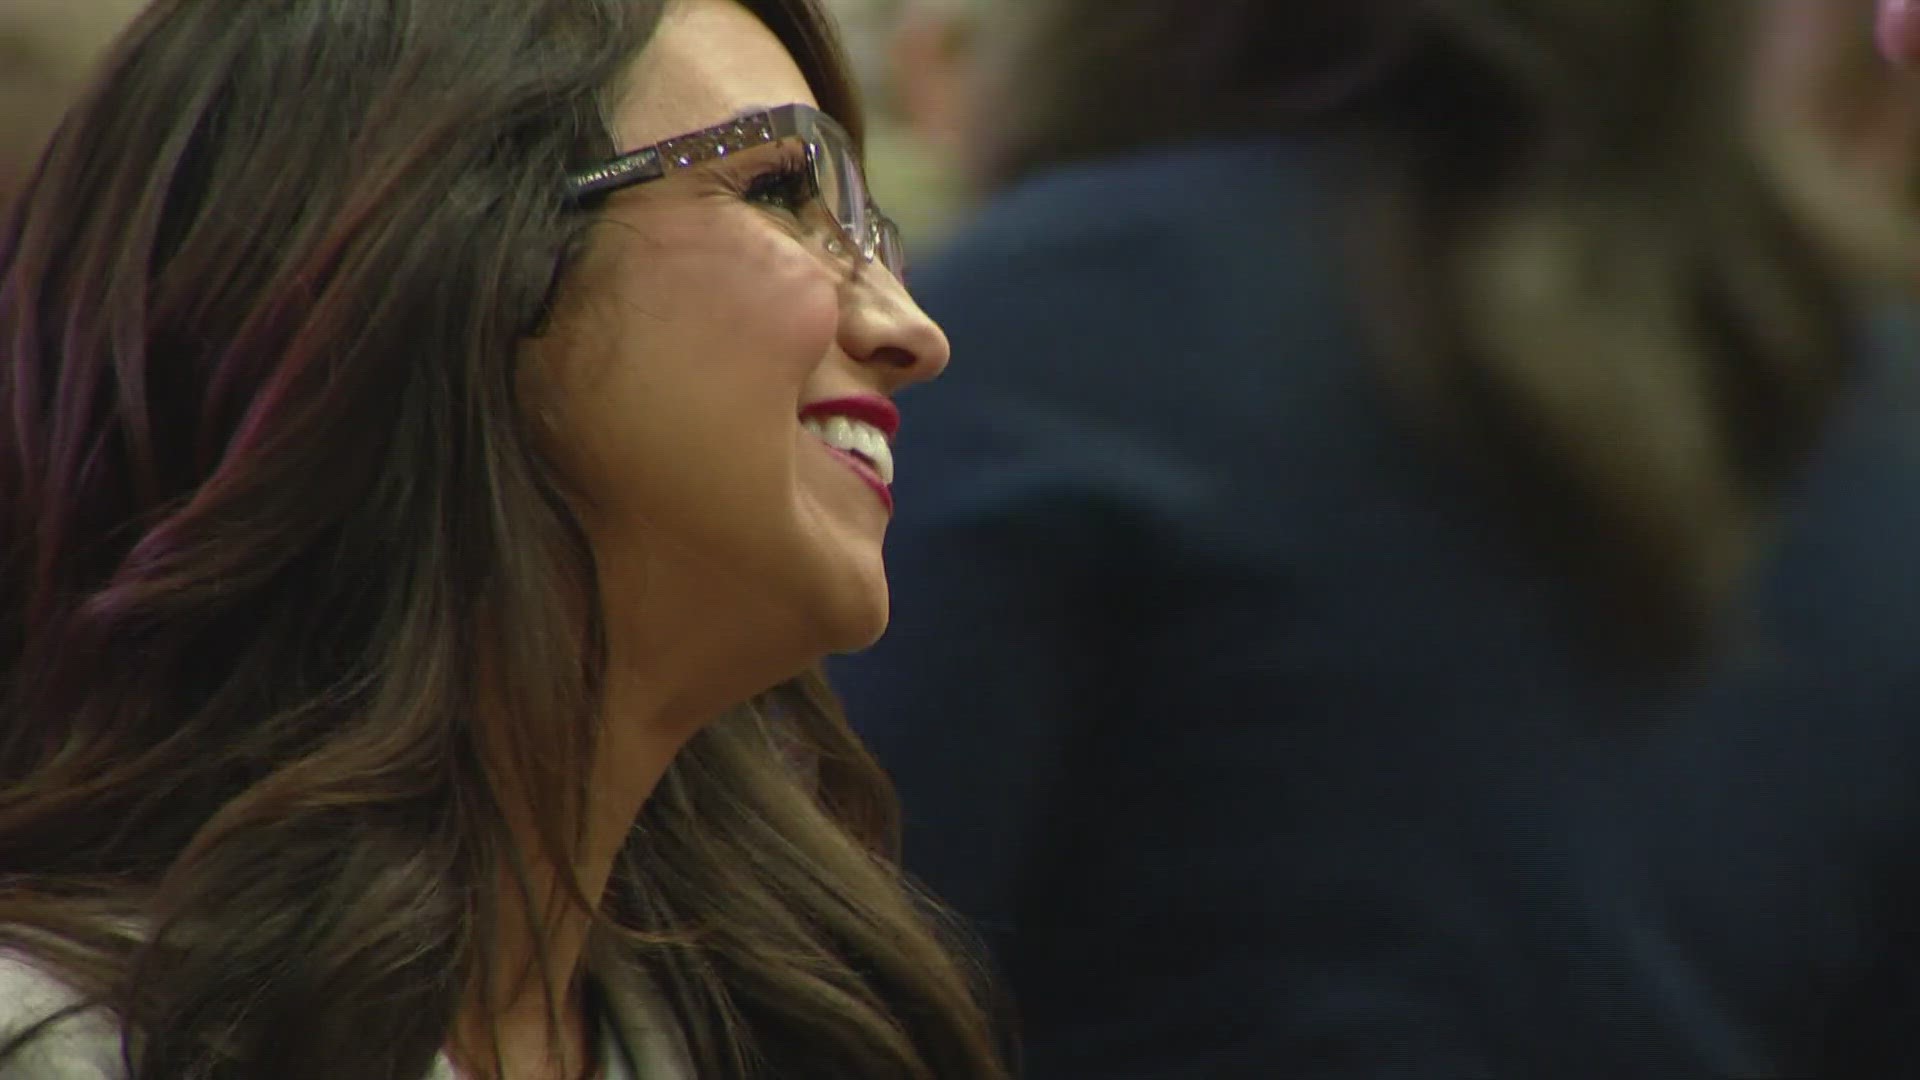 U.S. Rep. Lauren Boebert got the 10% minimum vote needed at Colorado GOP assembly in Pueblo on Friday to stay in the race for Colorado's 4th Congressional District.